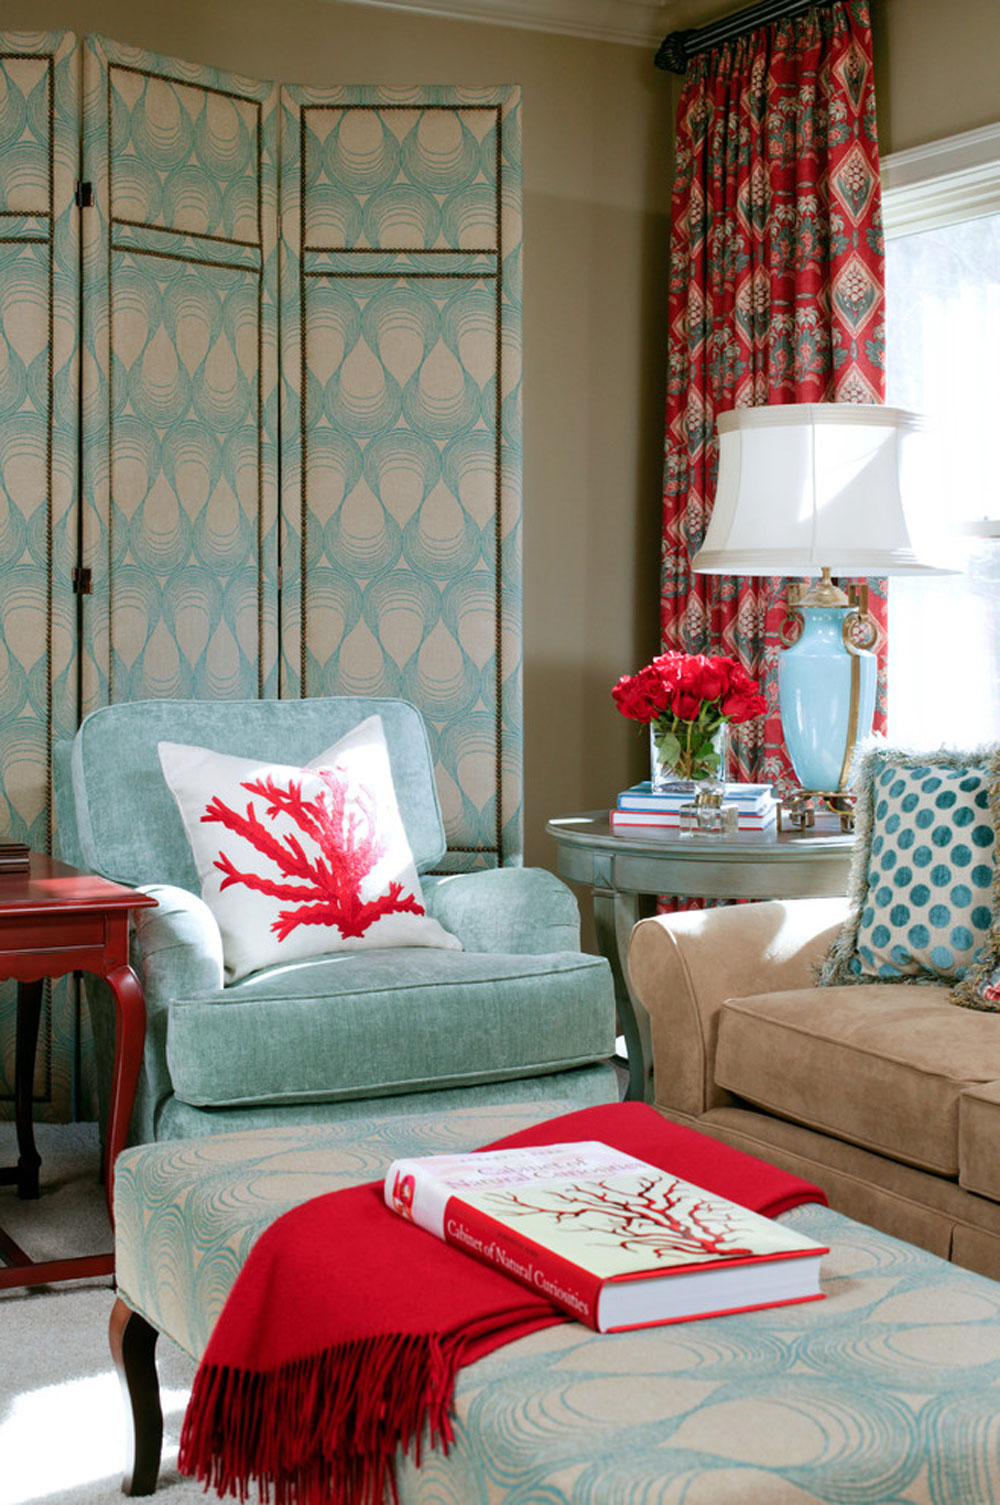 Bella-View-by-Tobi-Fairley-Interior-Design The aqua color: How to decorate your house interior with it